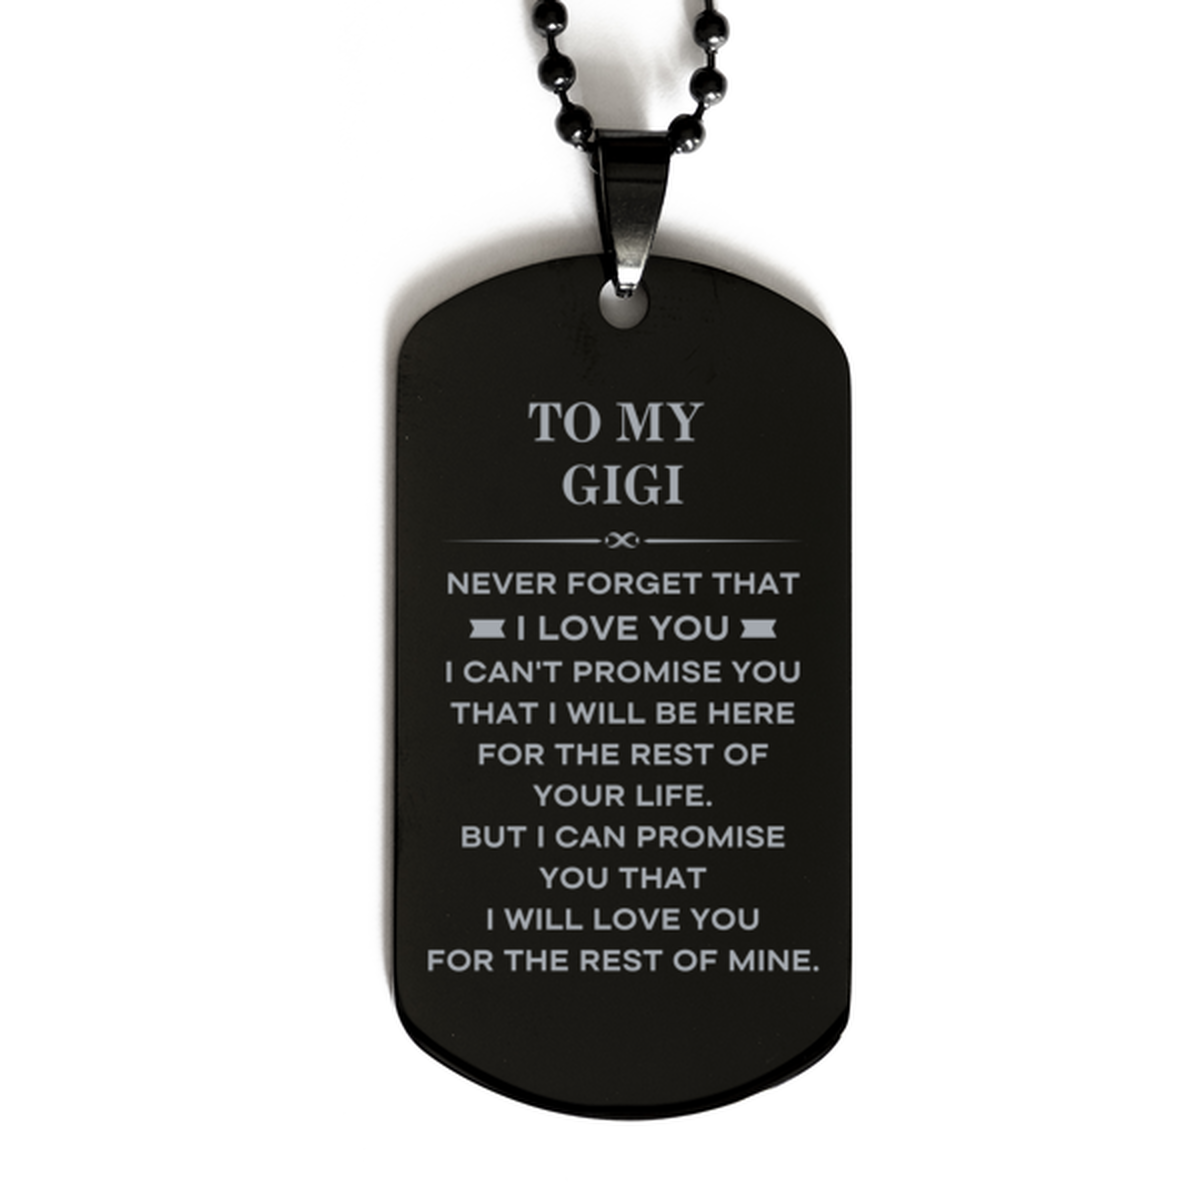 To My Gigi Gifts, I will love you for the rest of mine, Love Gigi Dog Tag Necklace, Birthday Christmas Unique Black Dog Tag For Gigi